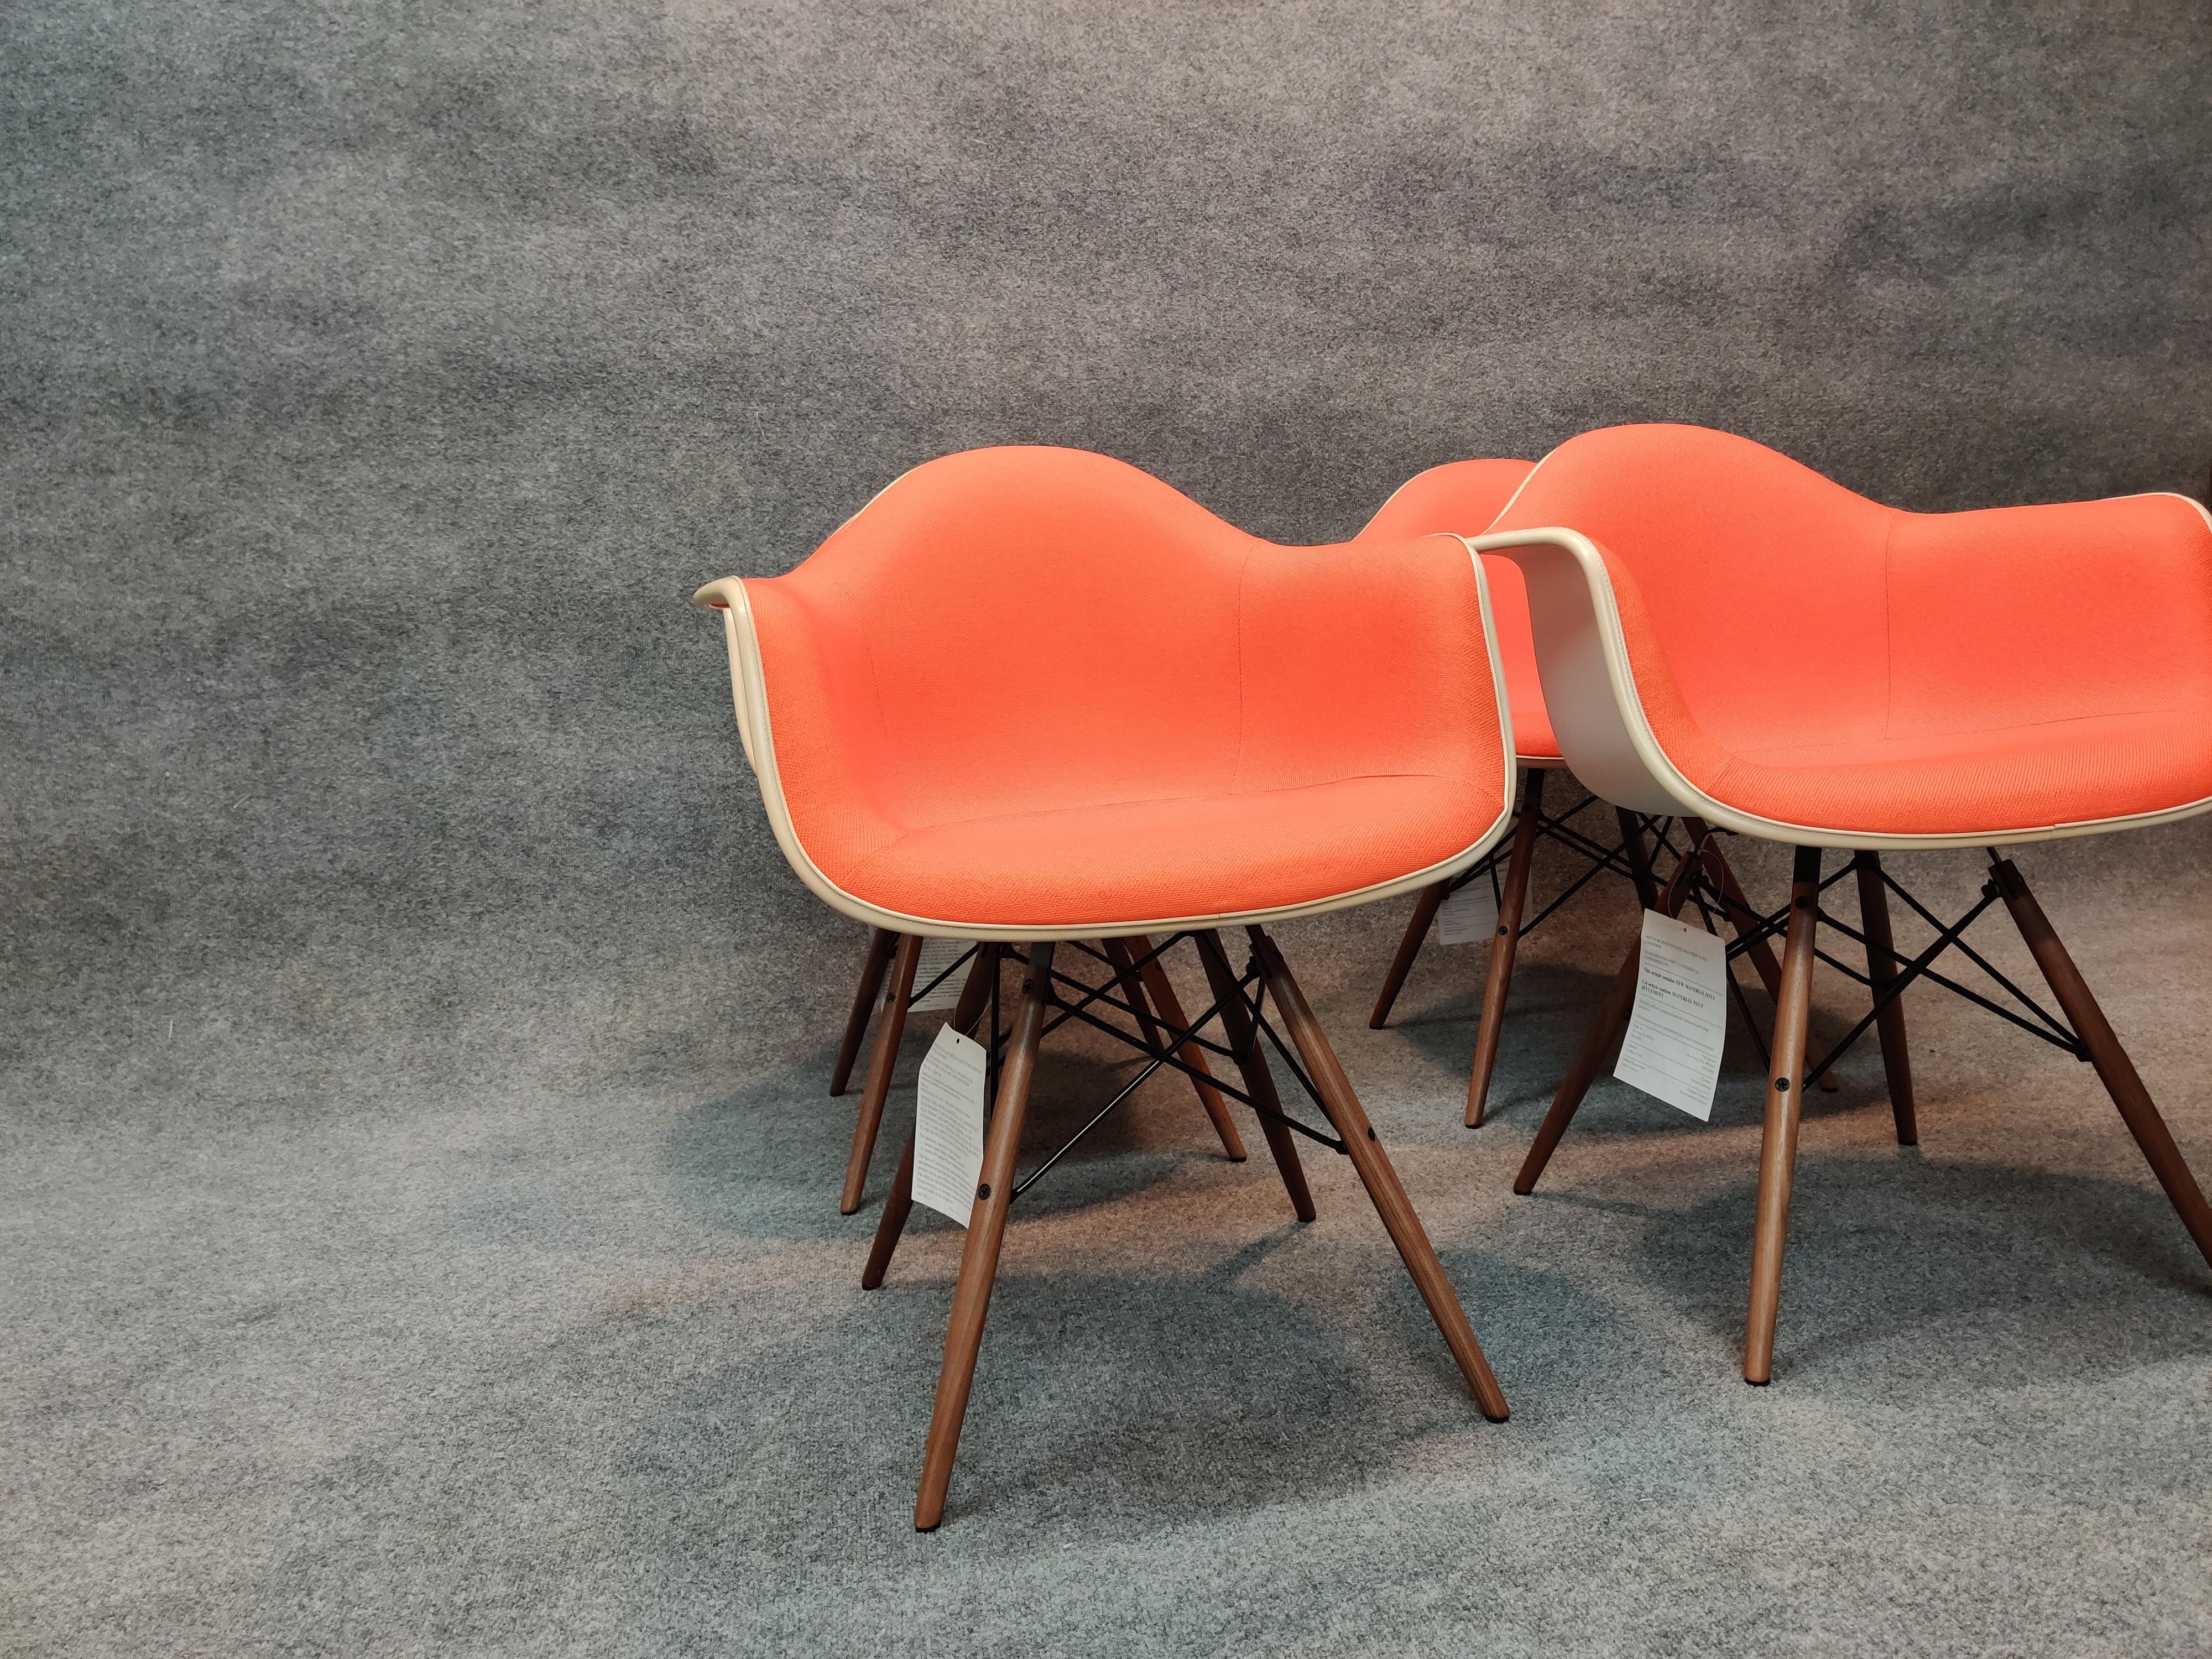 Designed by Eames, of recent manufacture by Herman Miller, these signed chairs are in like new condition. Each still retaining hang tags, shells are made of white plastic with an off-white band securing bright orange upholstery. Mounted on walnut